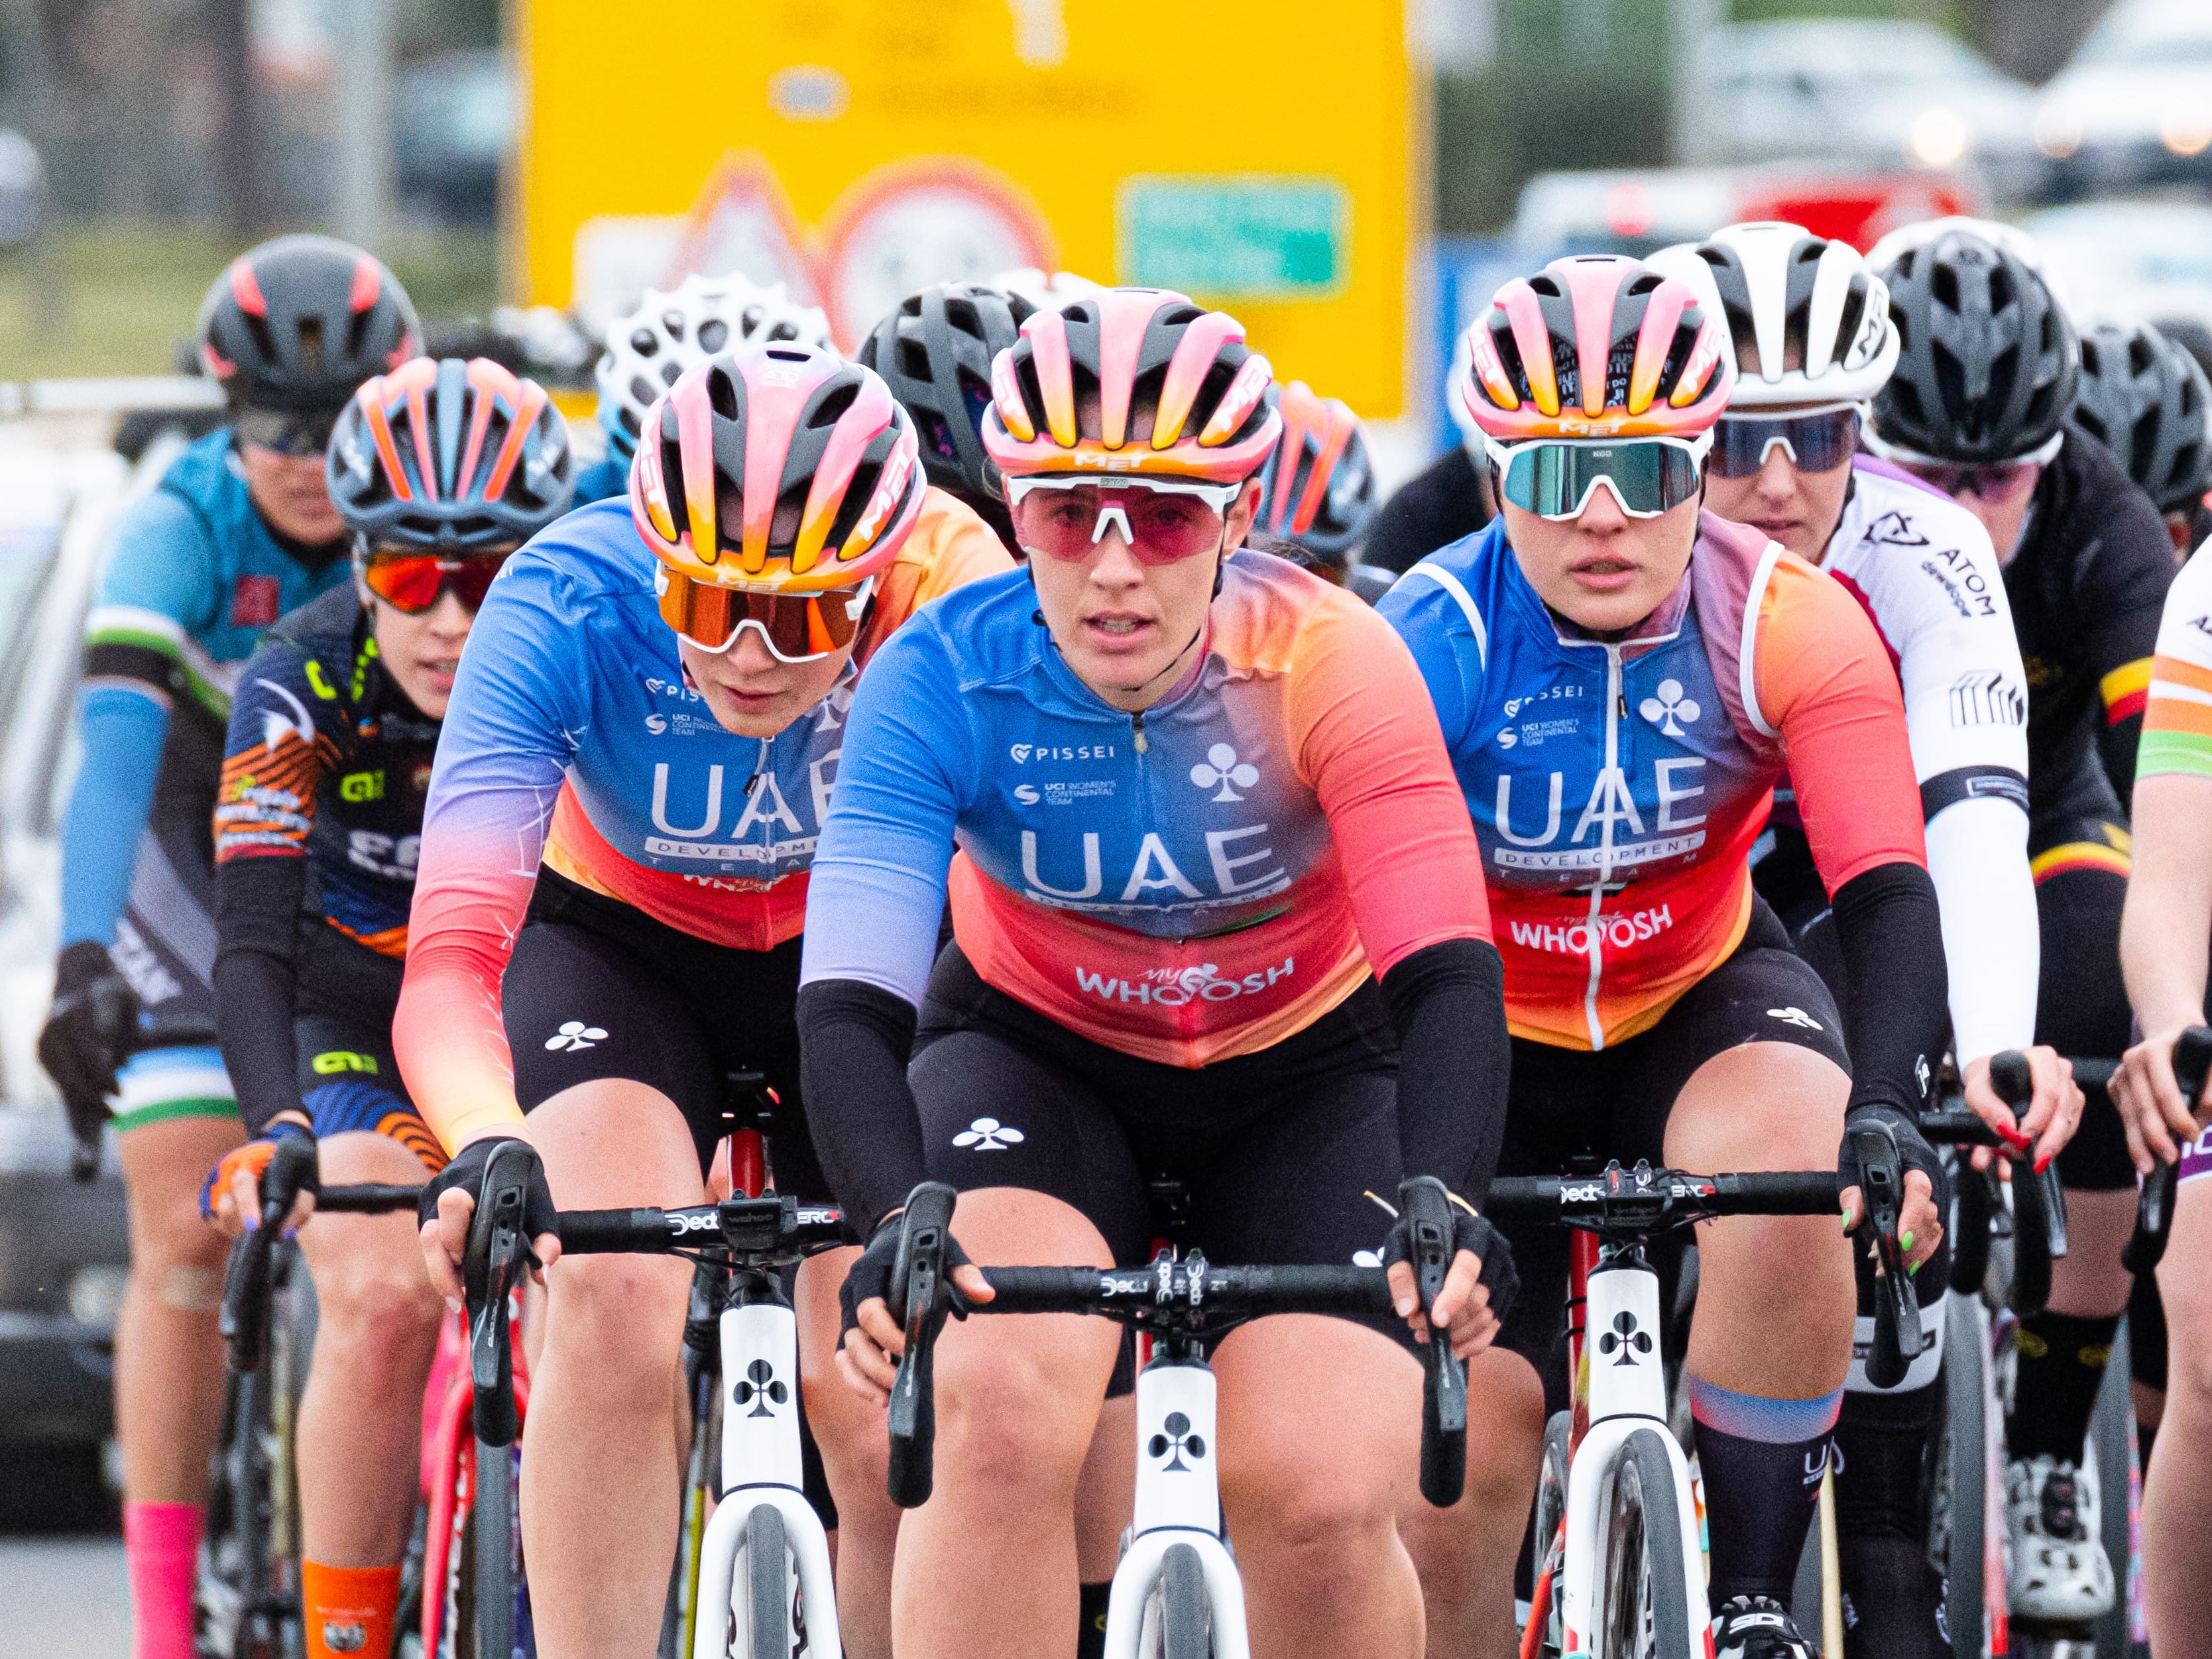 Five races in 10 days for the UAE Development Team